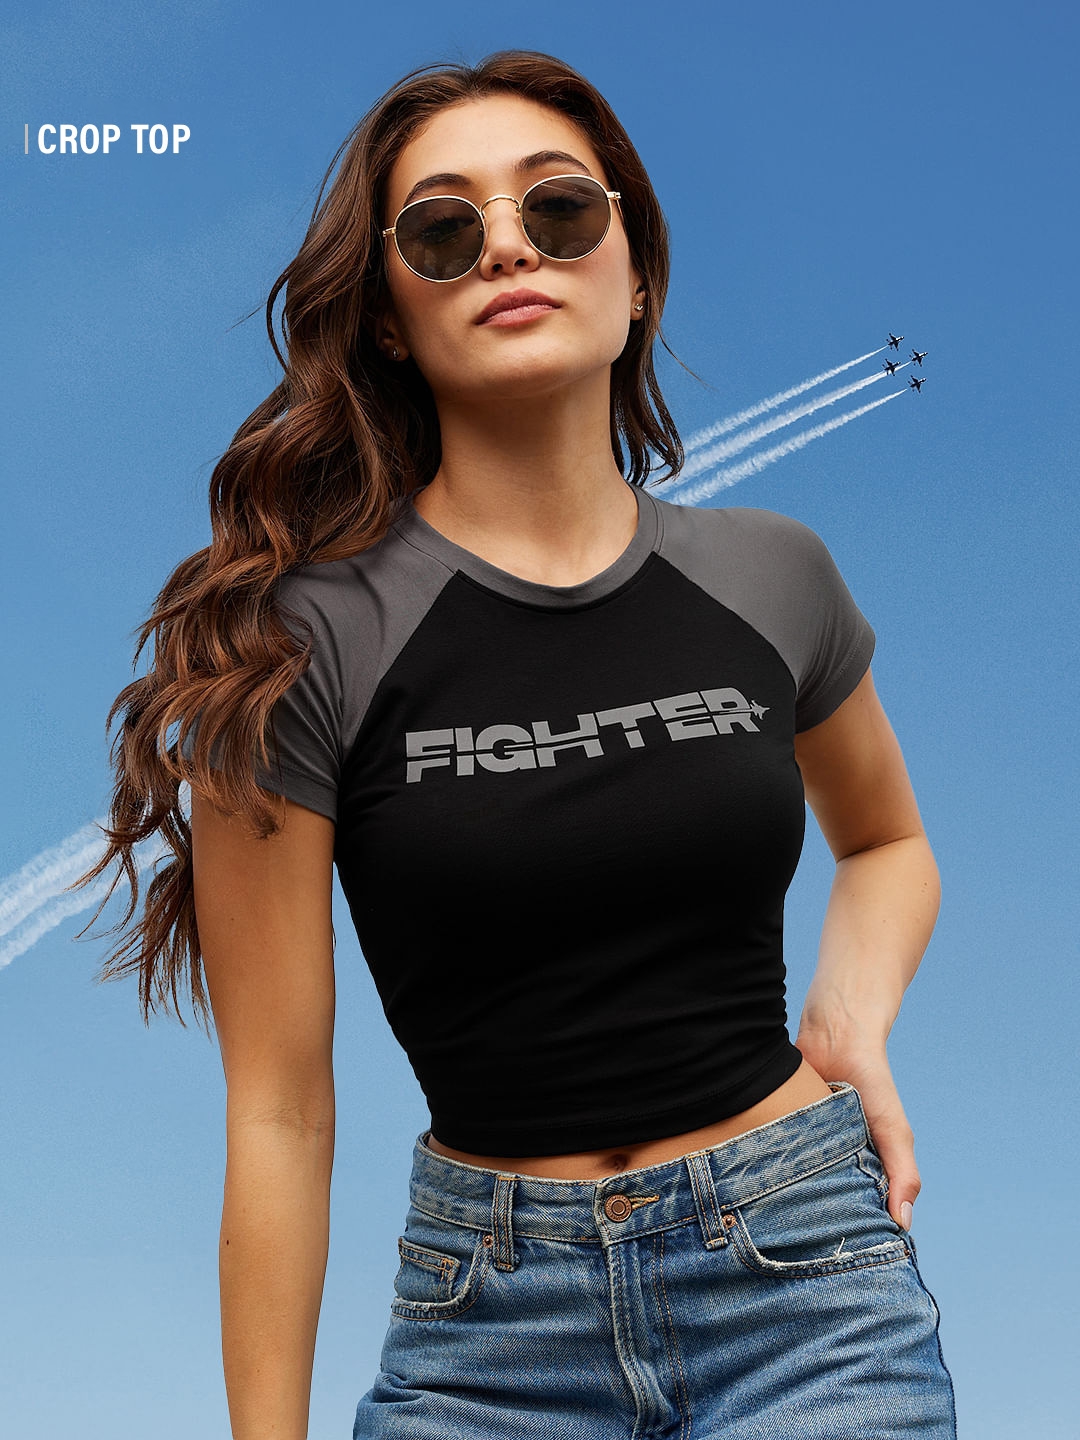 The Souled Store | Women's Fighter: Spirit Women's Cropped Tops